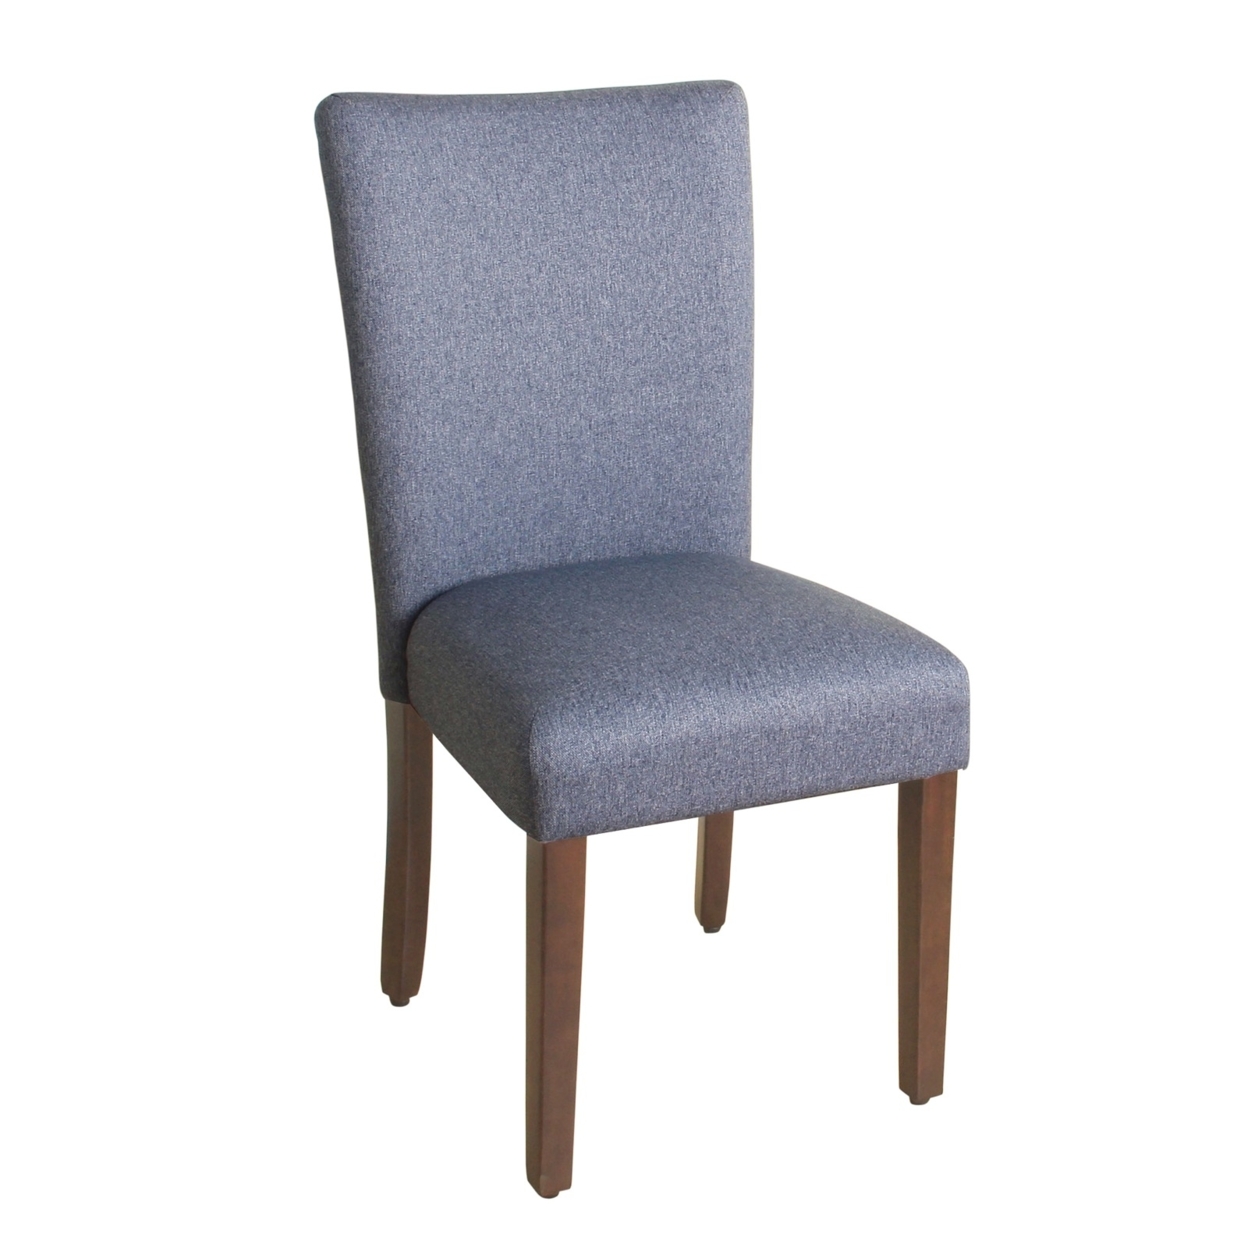 Fabric Upholstered Wooden Parson Dining Chair With Splayed Back, Blue And Brown- Saltoro Sherpi